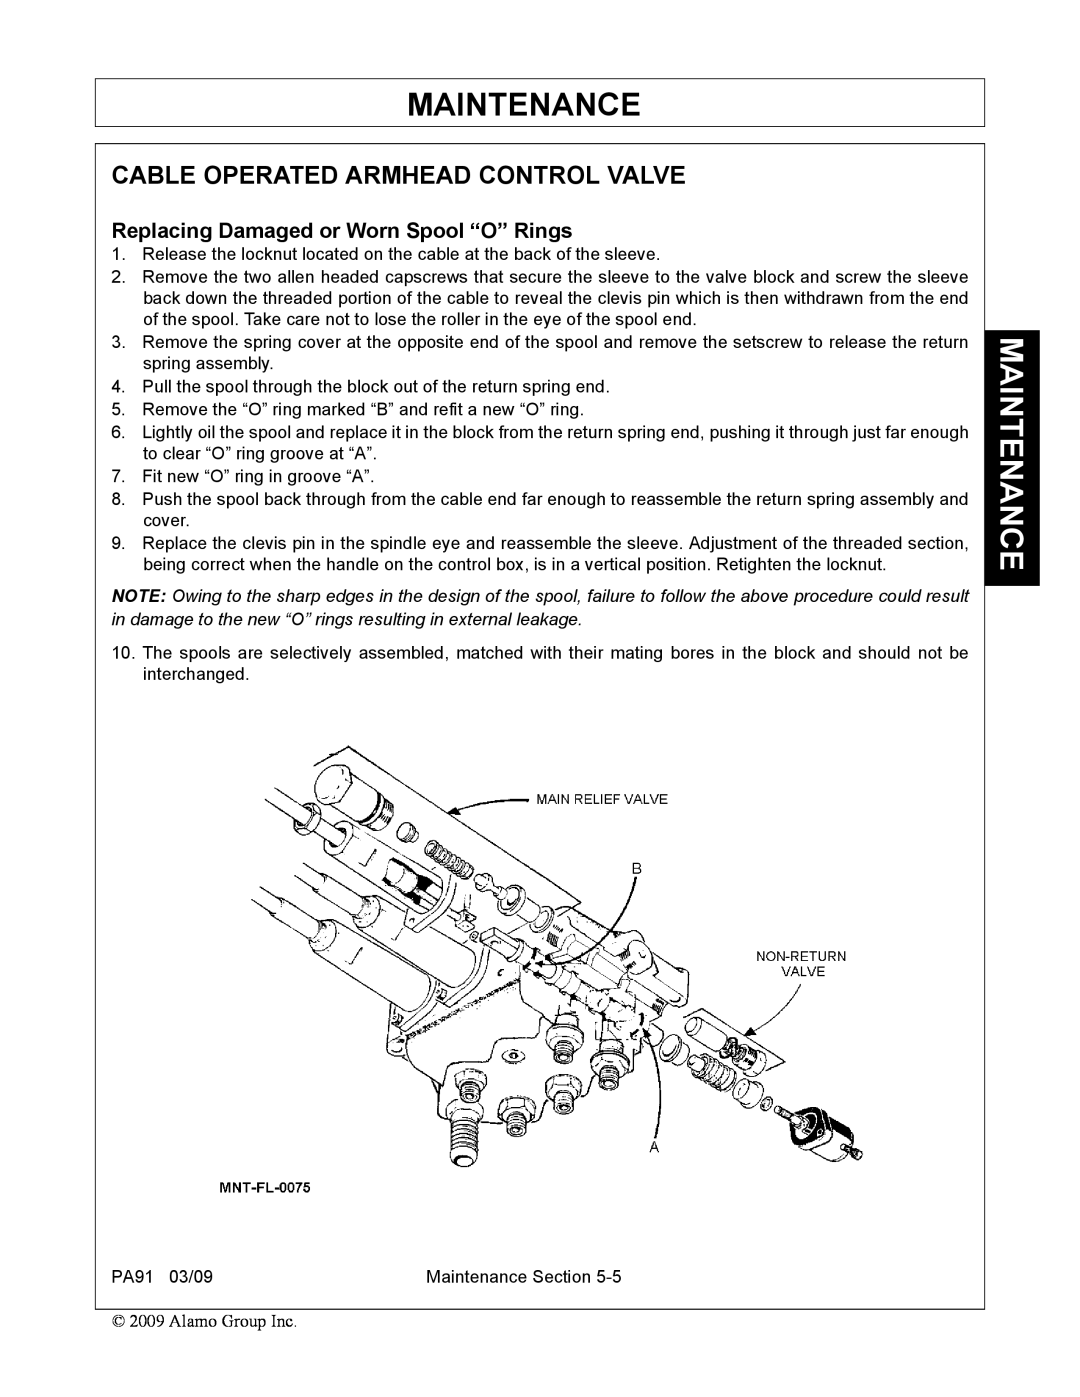 Alamo 7191852C manual Cable Operated Armhead Control Valve, Replacing Damaged or Worn Spool “O” Rings, Maintenance 